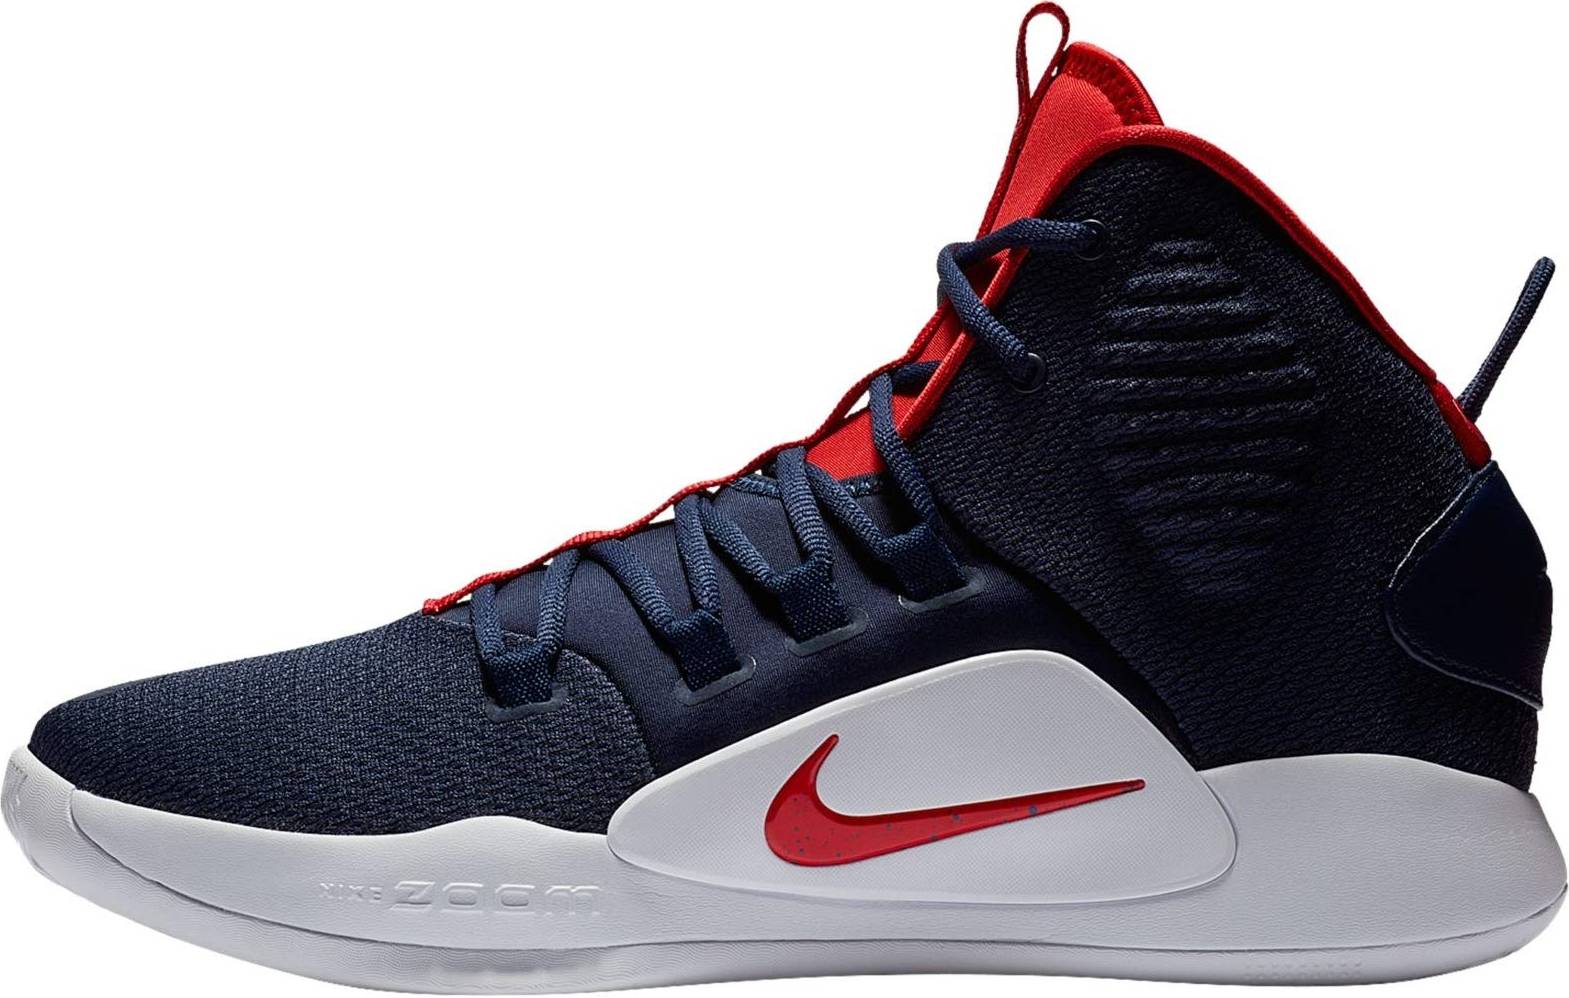 Only £66 + Review of Nike Hyperdunk X 